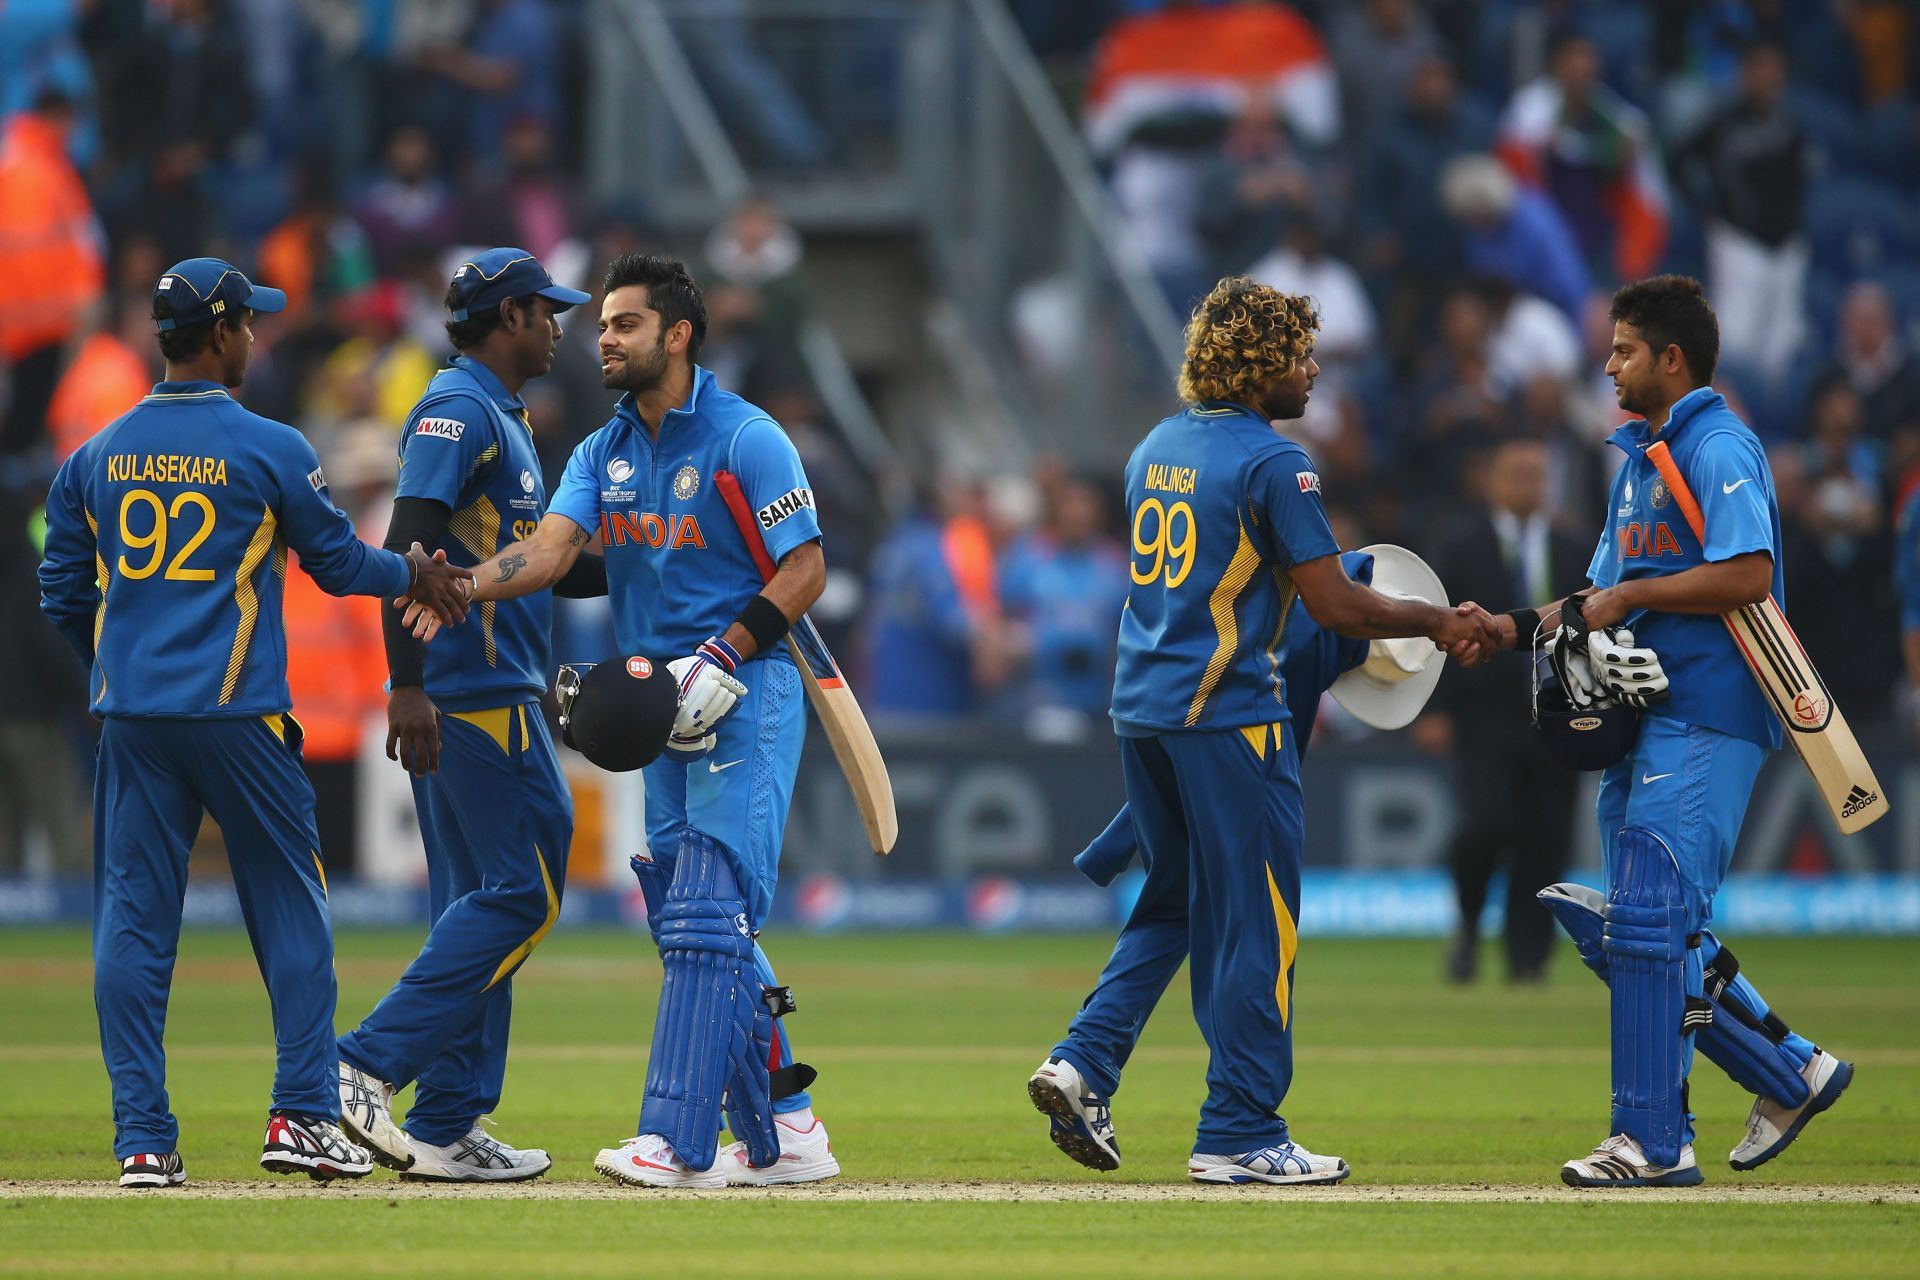 India and Sri Lanka are the most successful teams in the Asia Cup. Pic: Getty Images